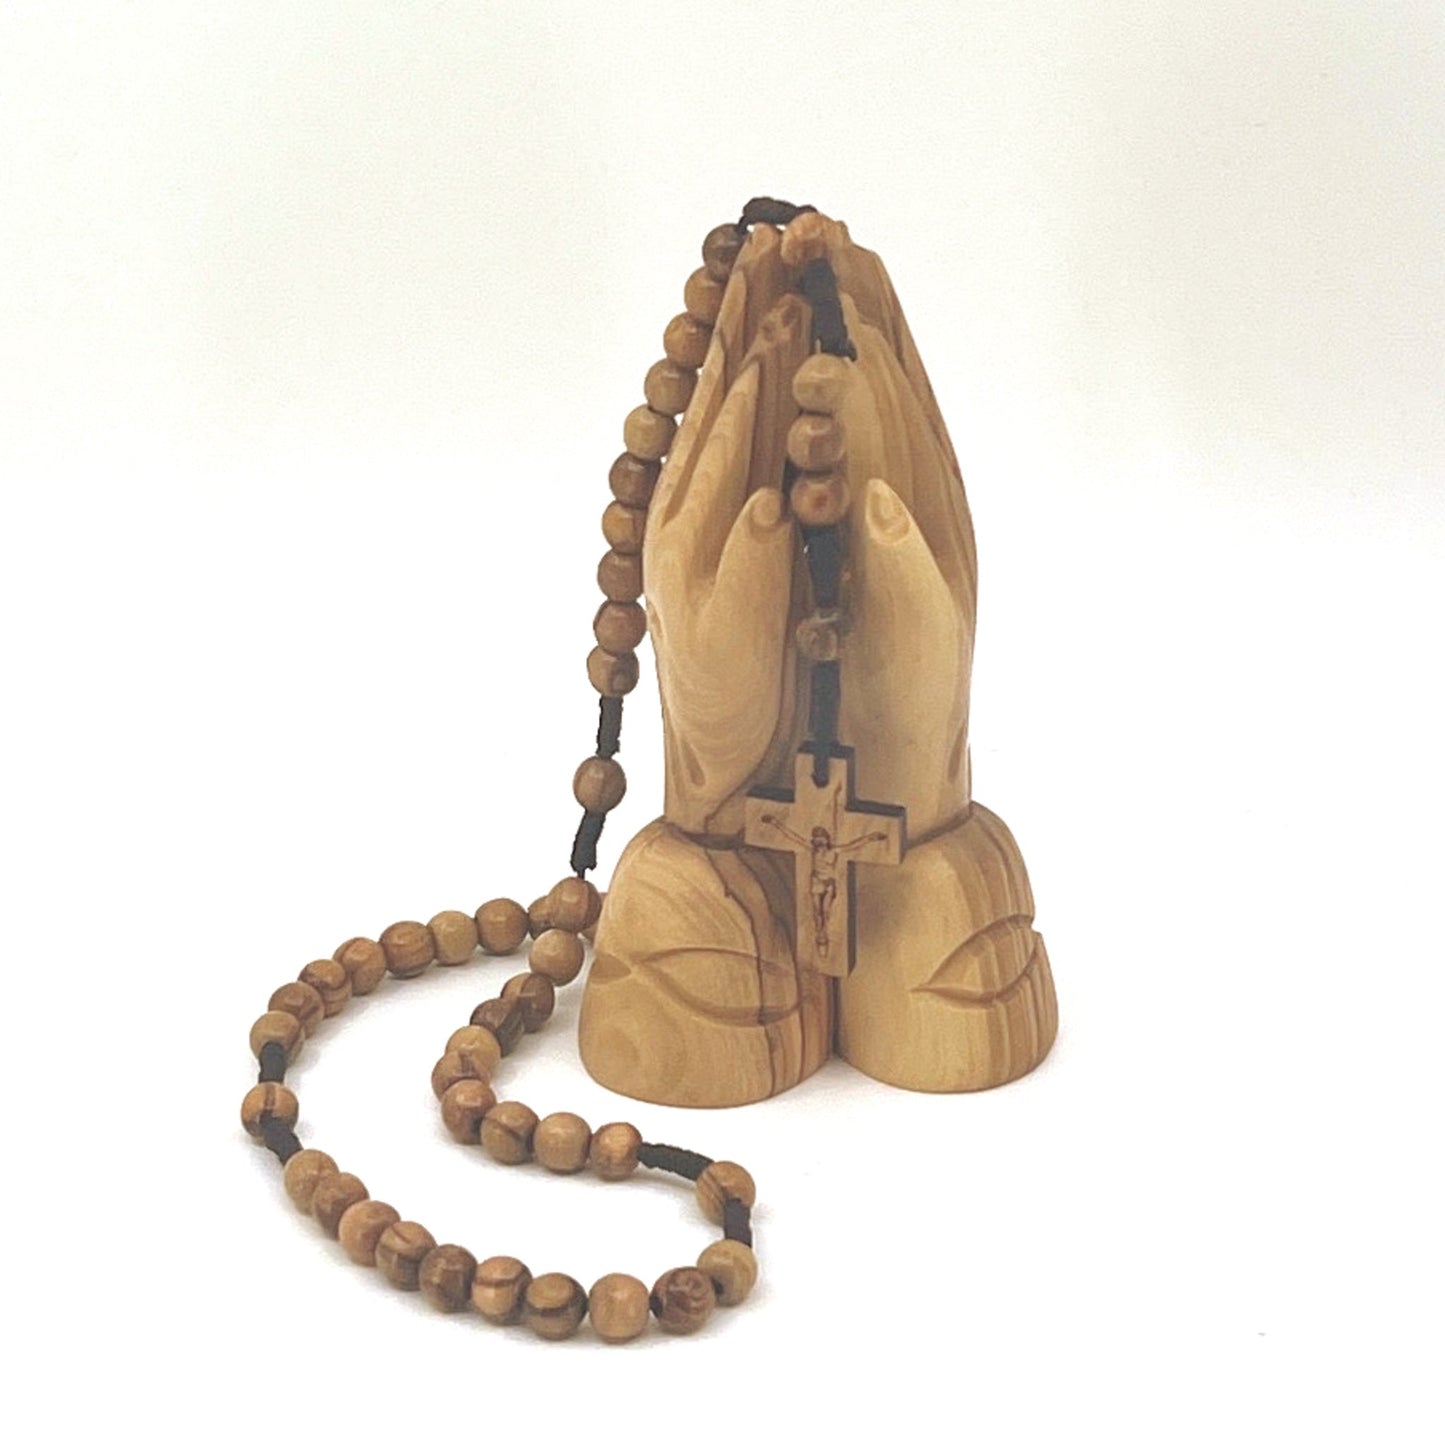 Set of 6, Pocket Rosaries w/ Wooden Beads and Engraved Crucifix, Handmade in Bethlehem